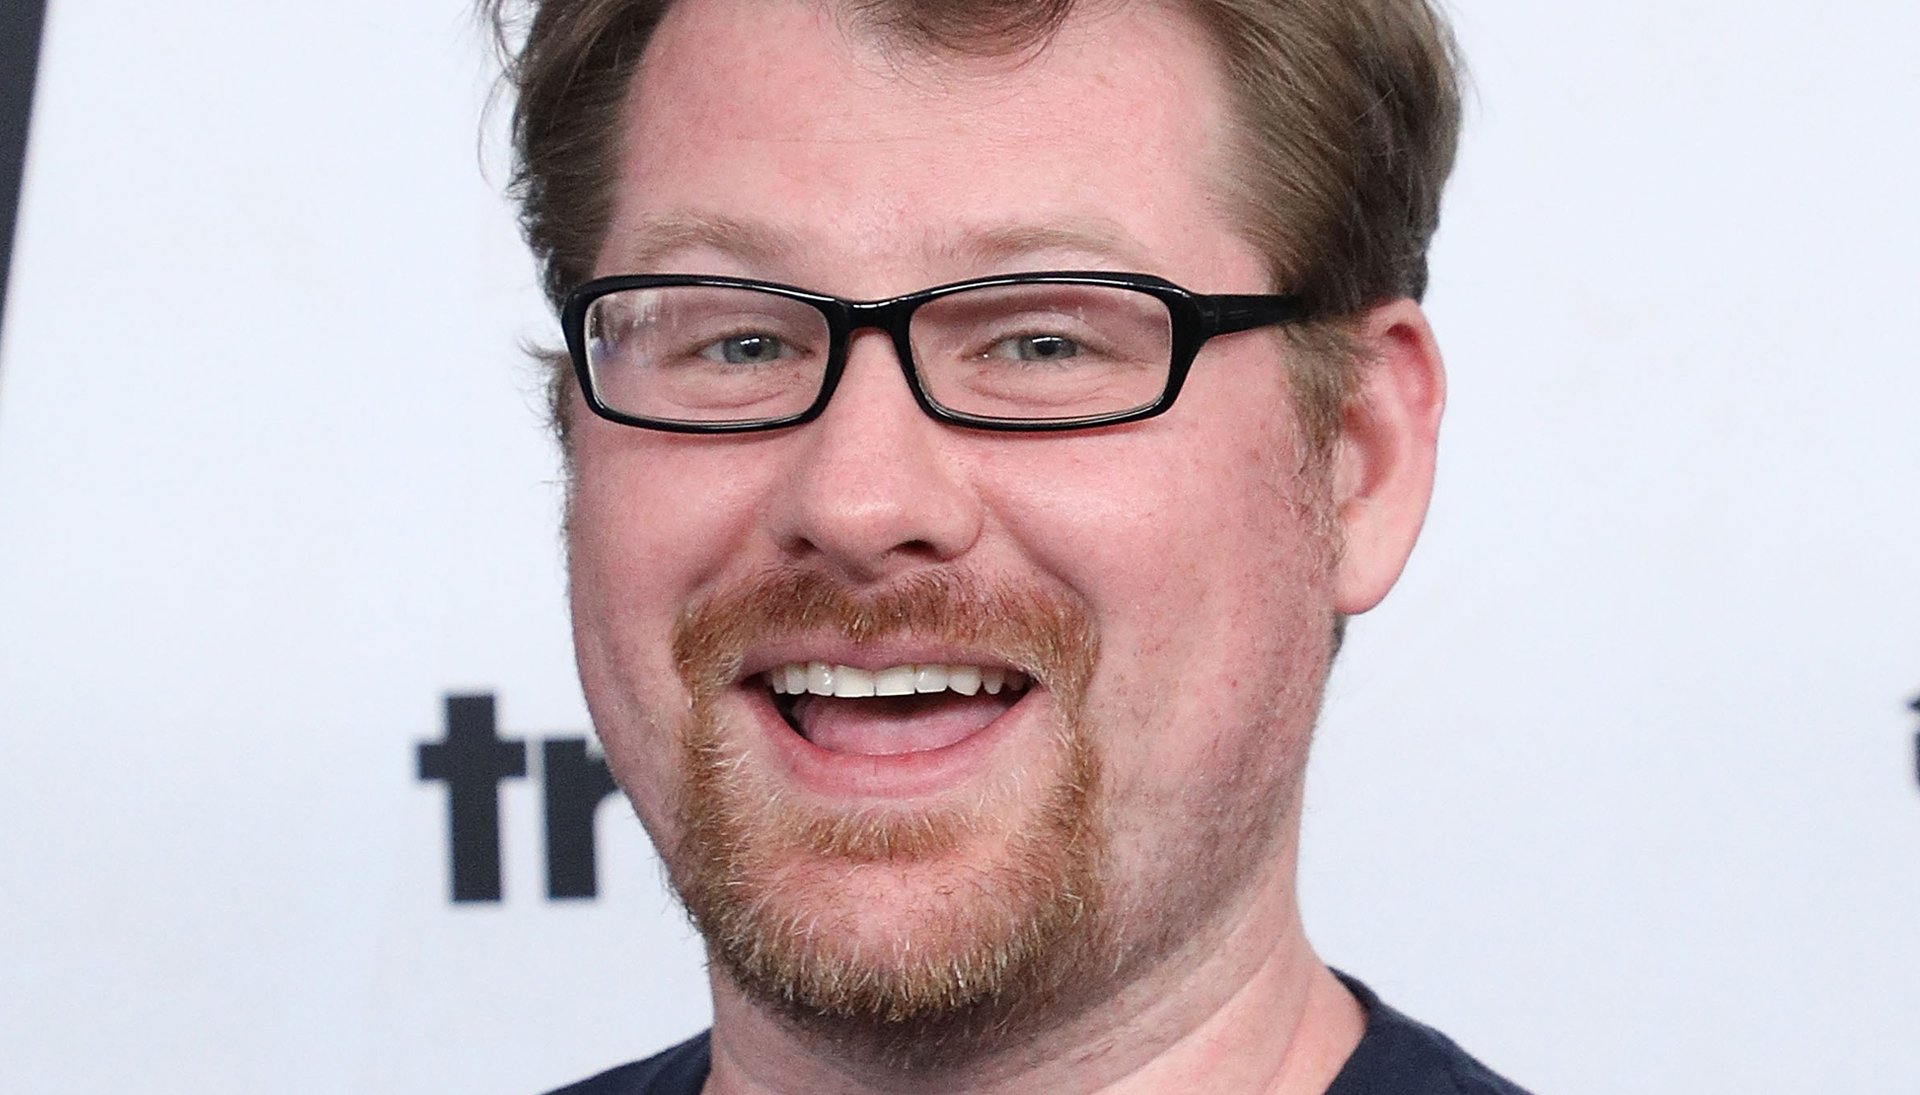 ‘Rick and Morty’ co-creator Justin Roiland attends the 2018 Turner Upfront at One Penn Plaza on May 16, 2018 in New York City